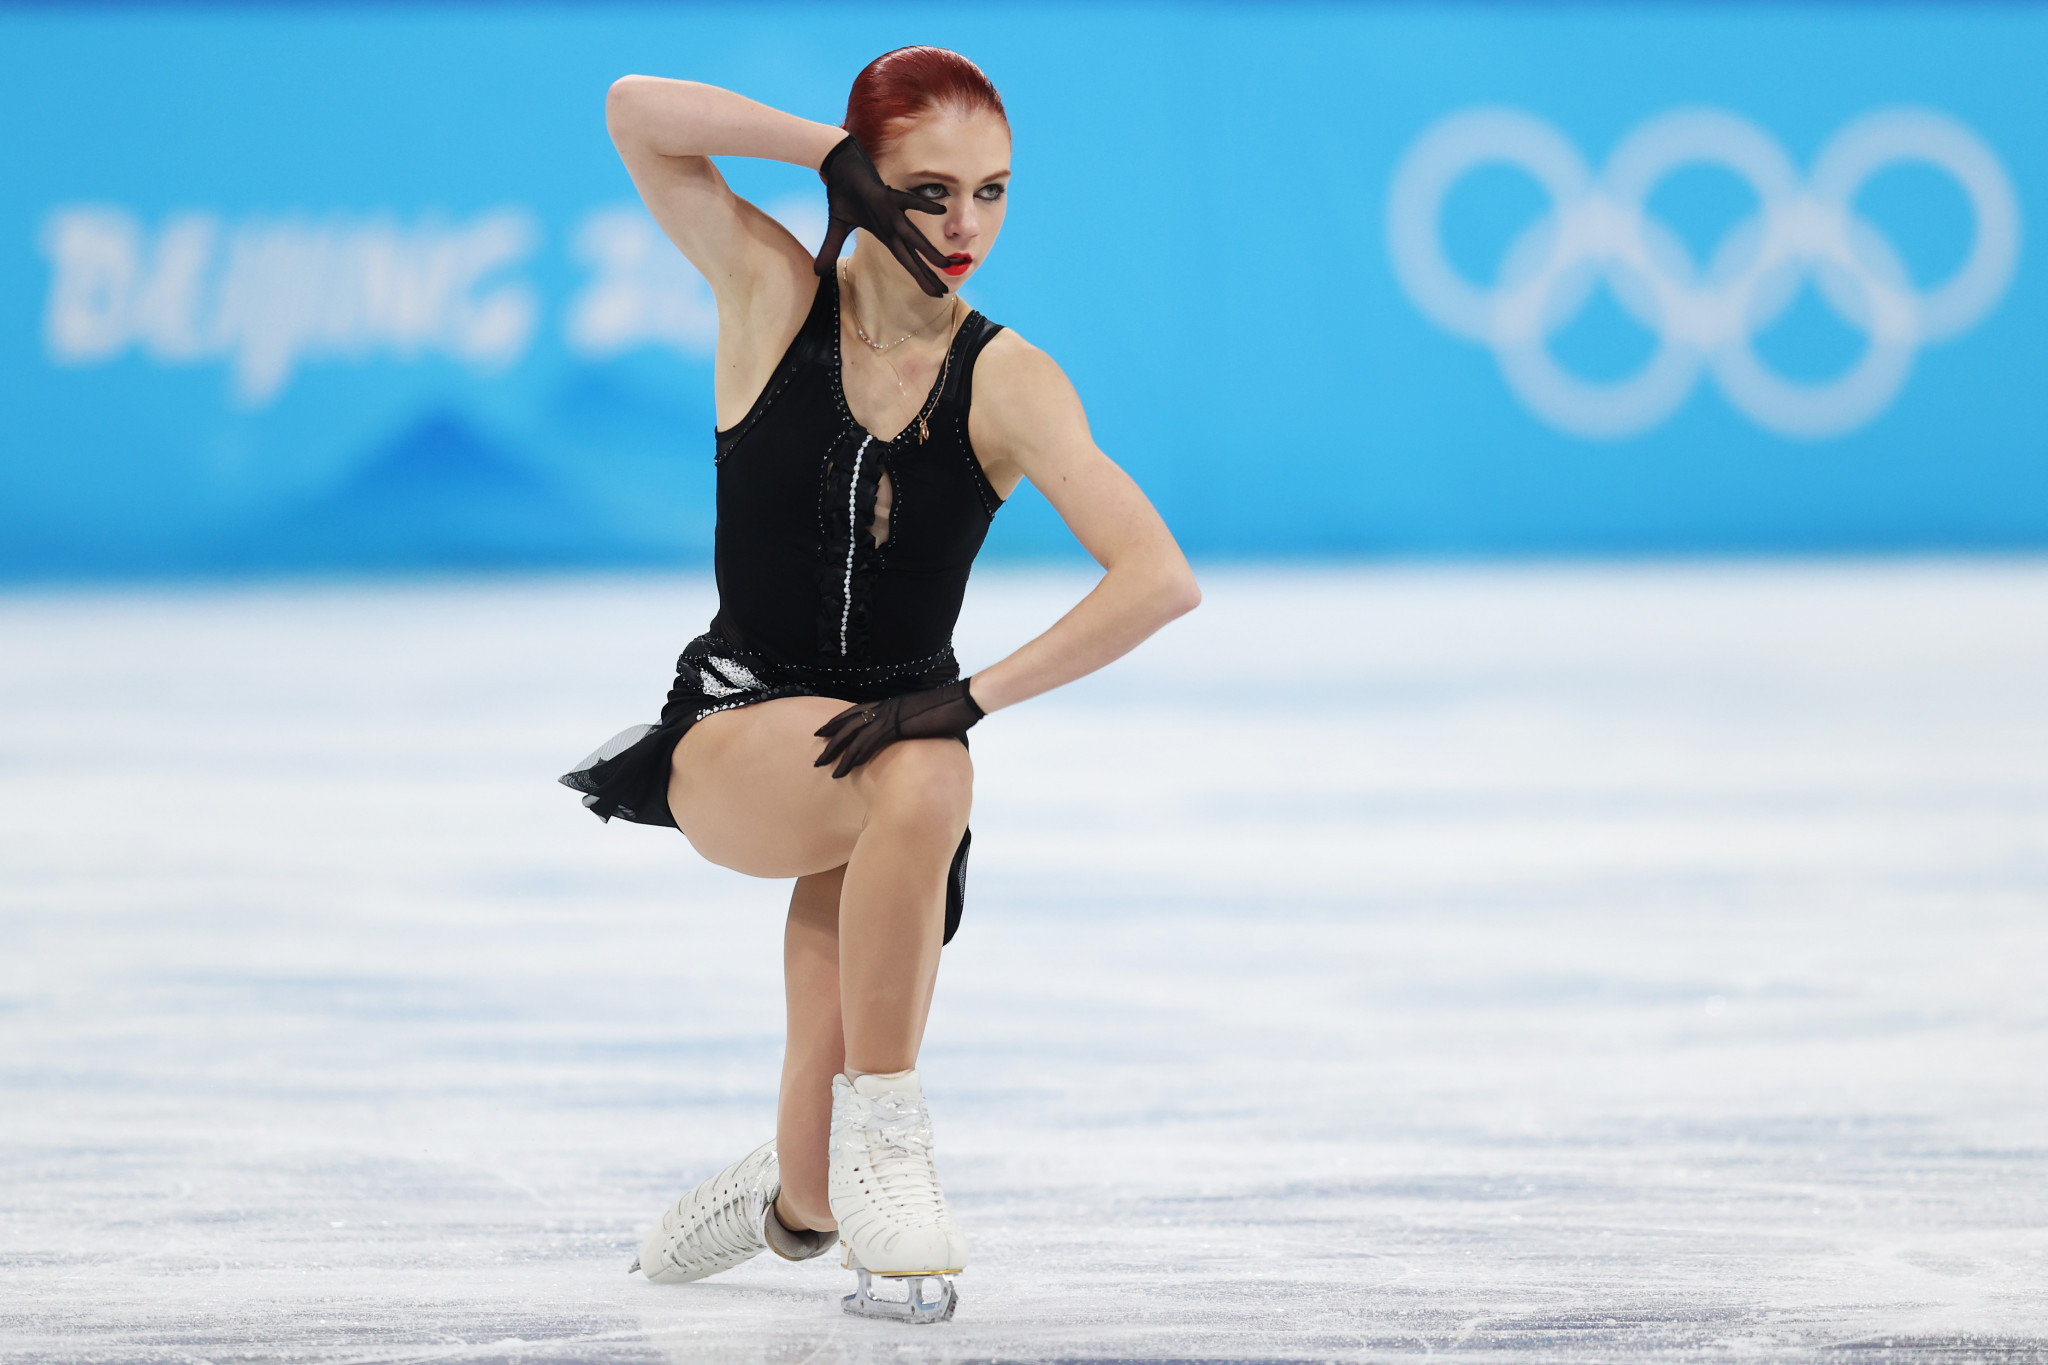 The event left a sour taste in the mouths of many, with another ROC athlete Alexandra Trusova - the silver medallist - suggesting she may never skate again ©Getty Images